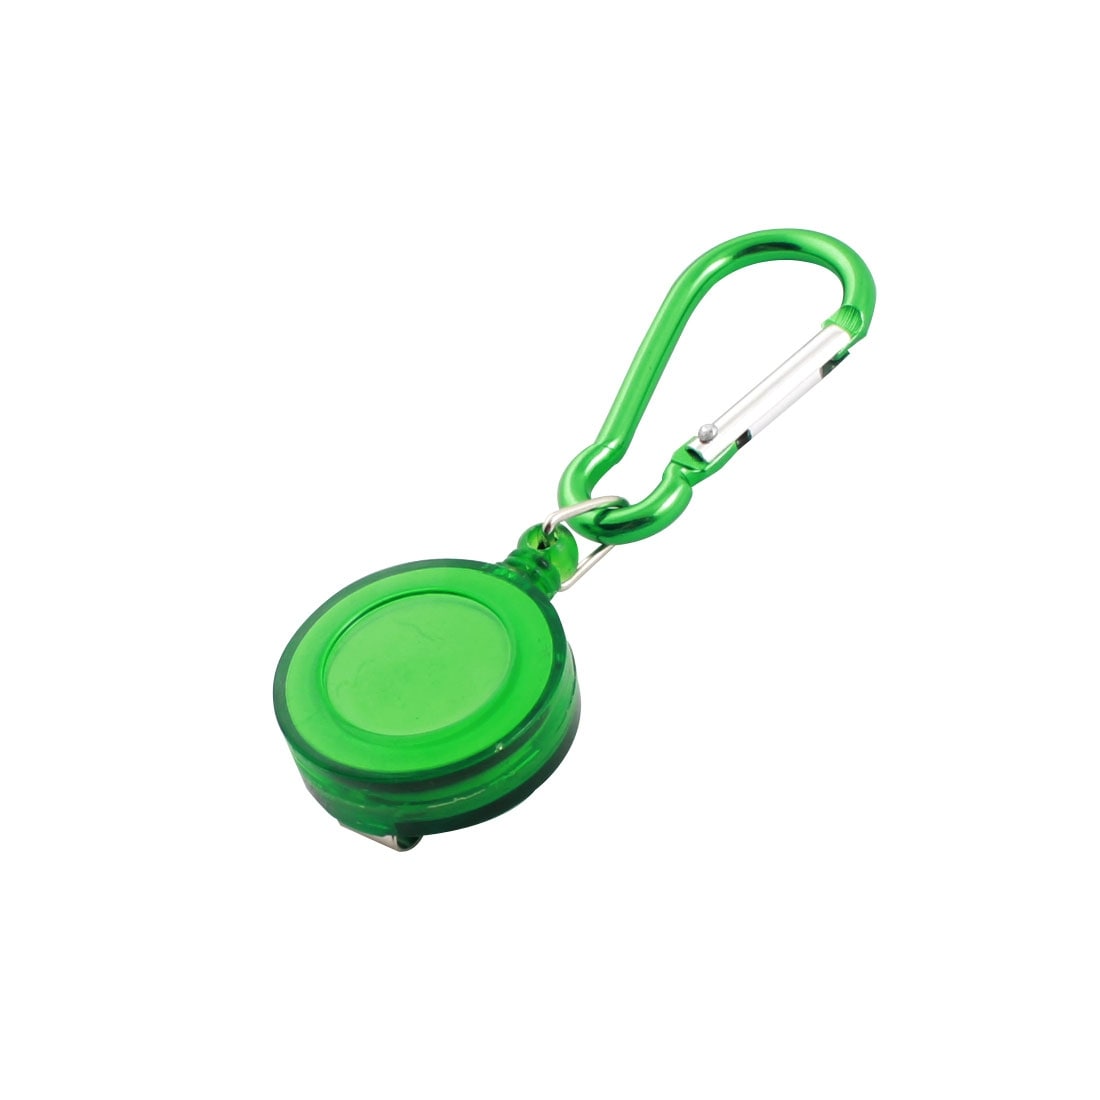 https://ak1.ostkcdn.com/images/products/is/images/direct/64d944579dd5719afff1ffa7b67f88778c1fd323/Green-D-Shaped-Carabiner-Retractable-Cord-Badge-Reel-Keychain-3.5-Long.jpg